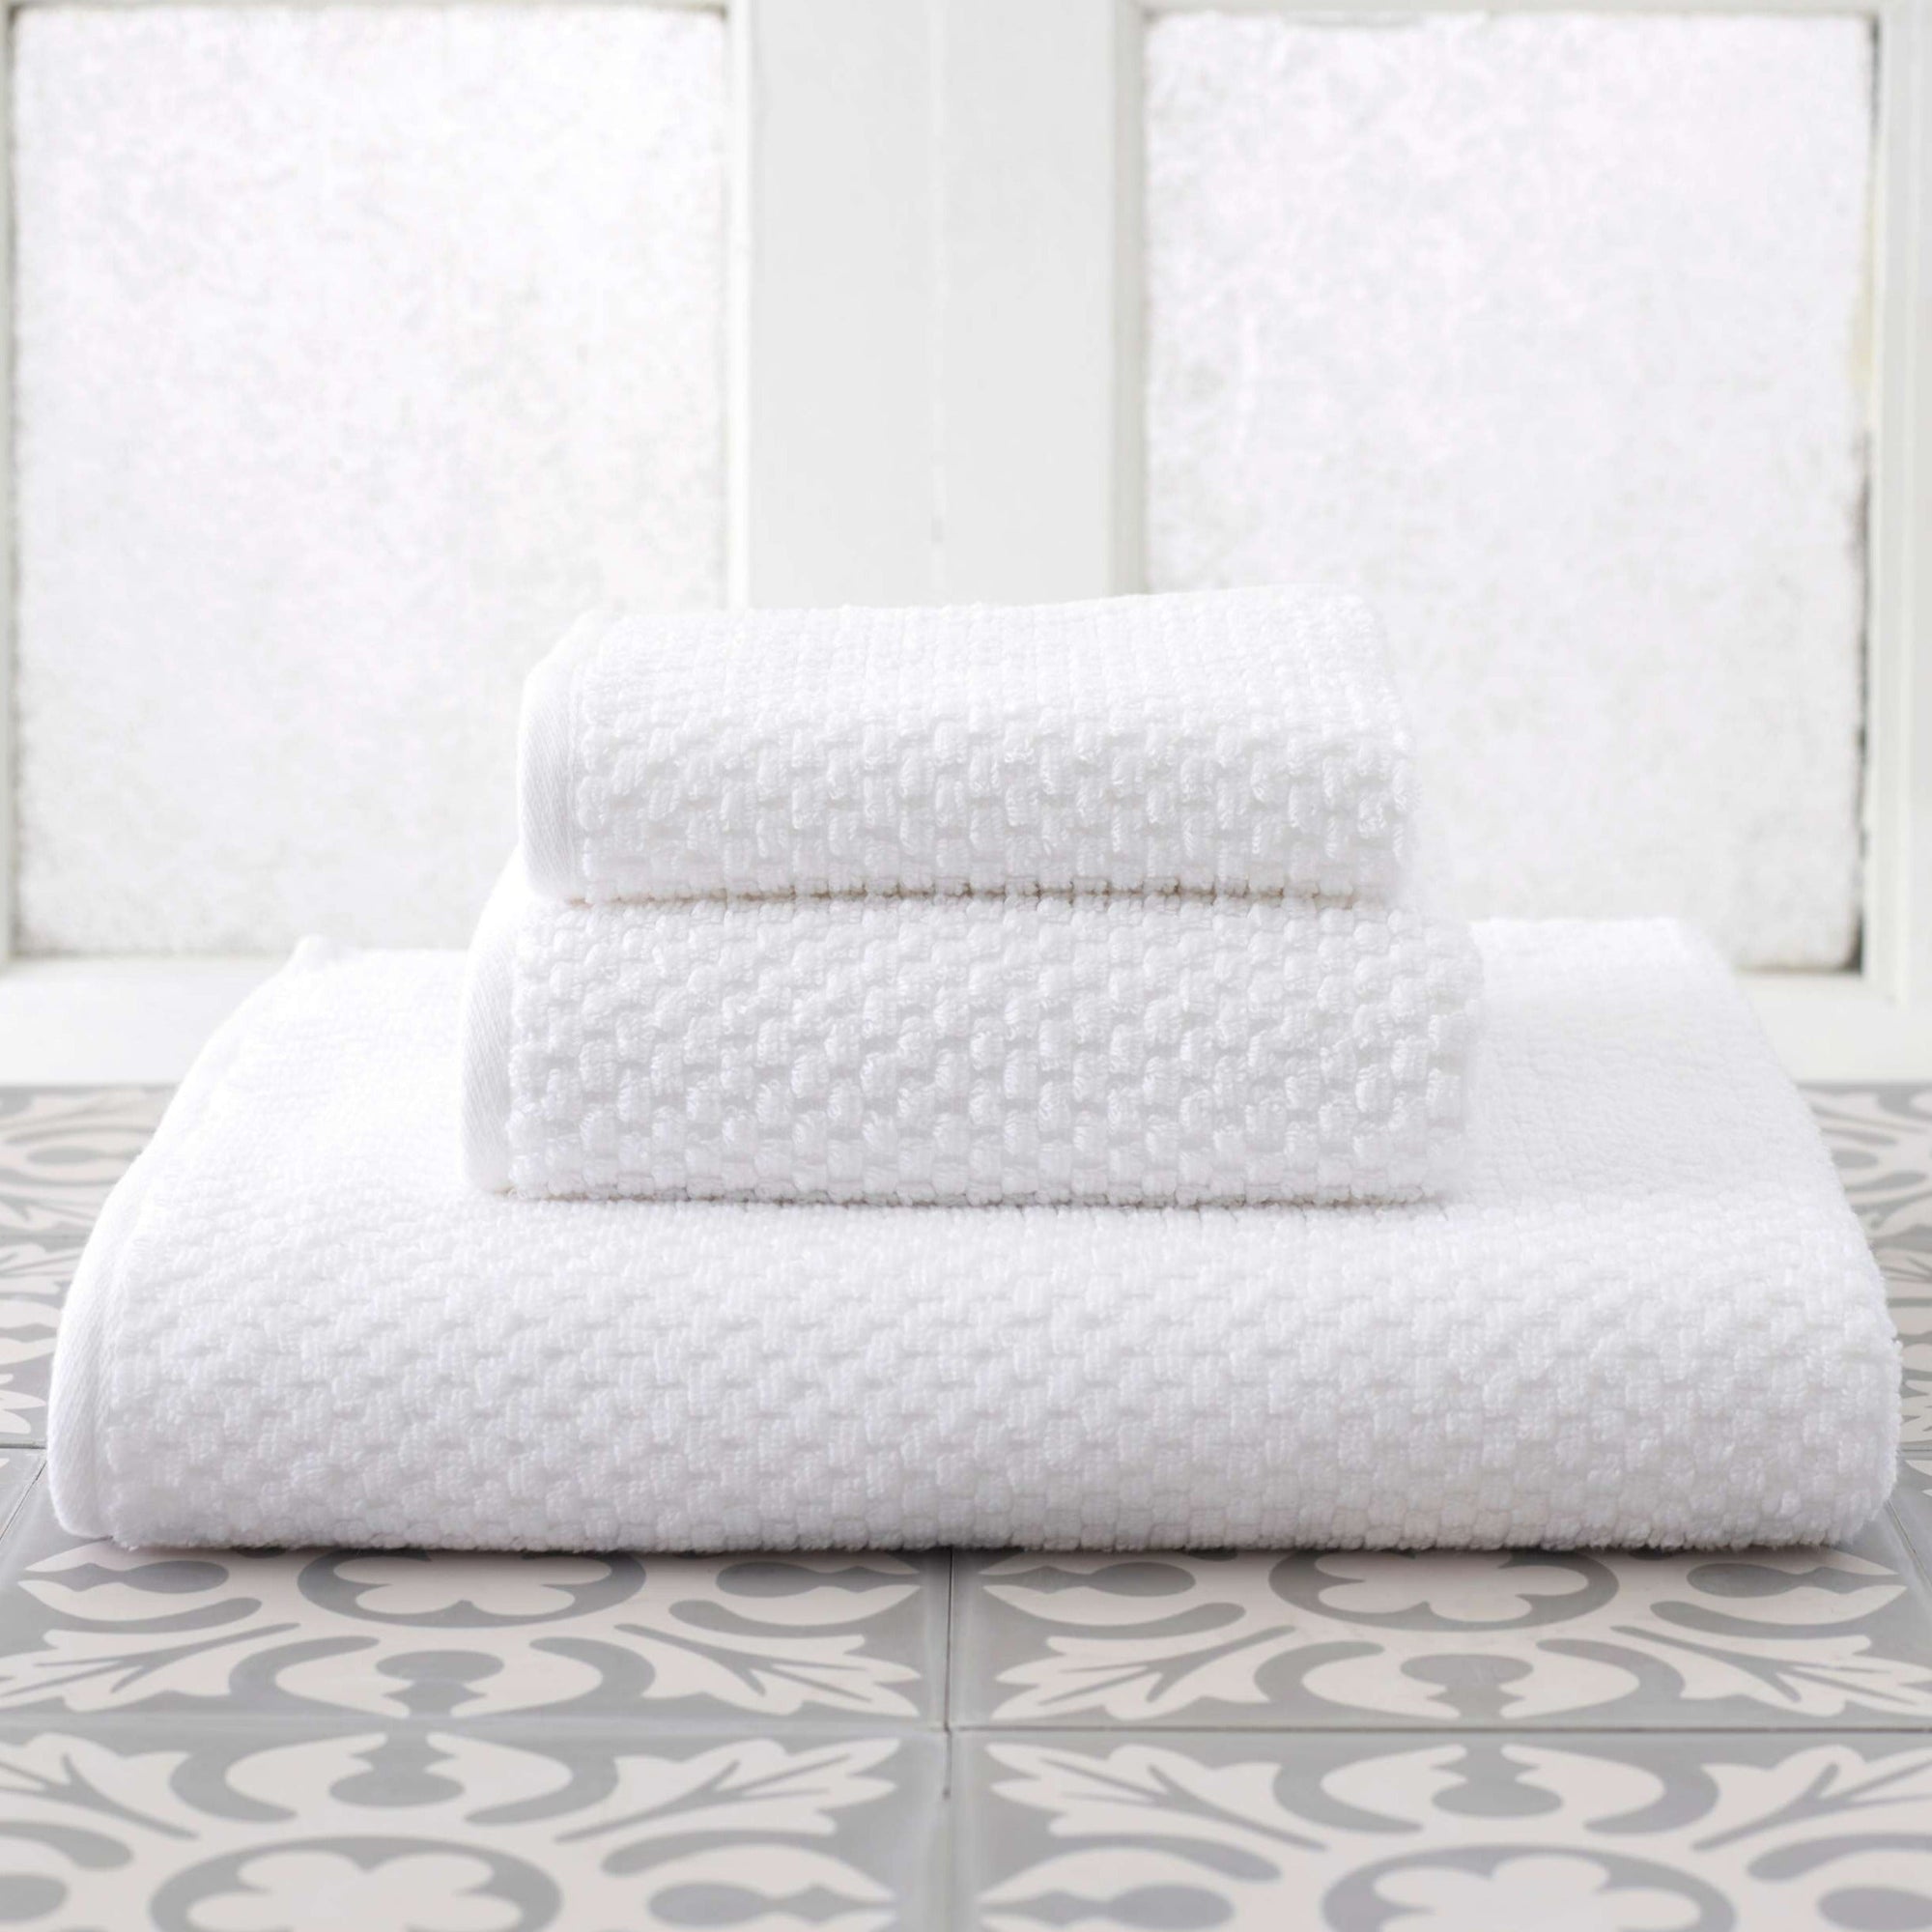 Pine Cone Hill - Signature Banded White/Black Towel